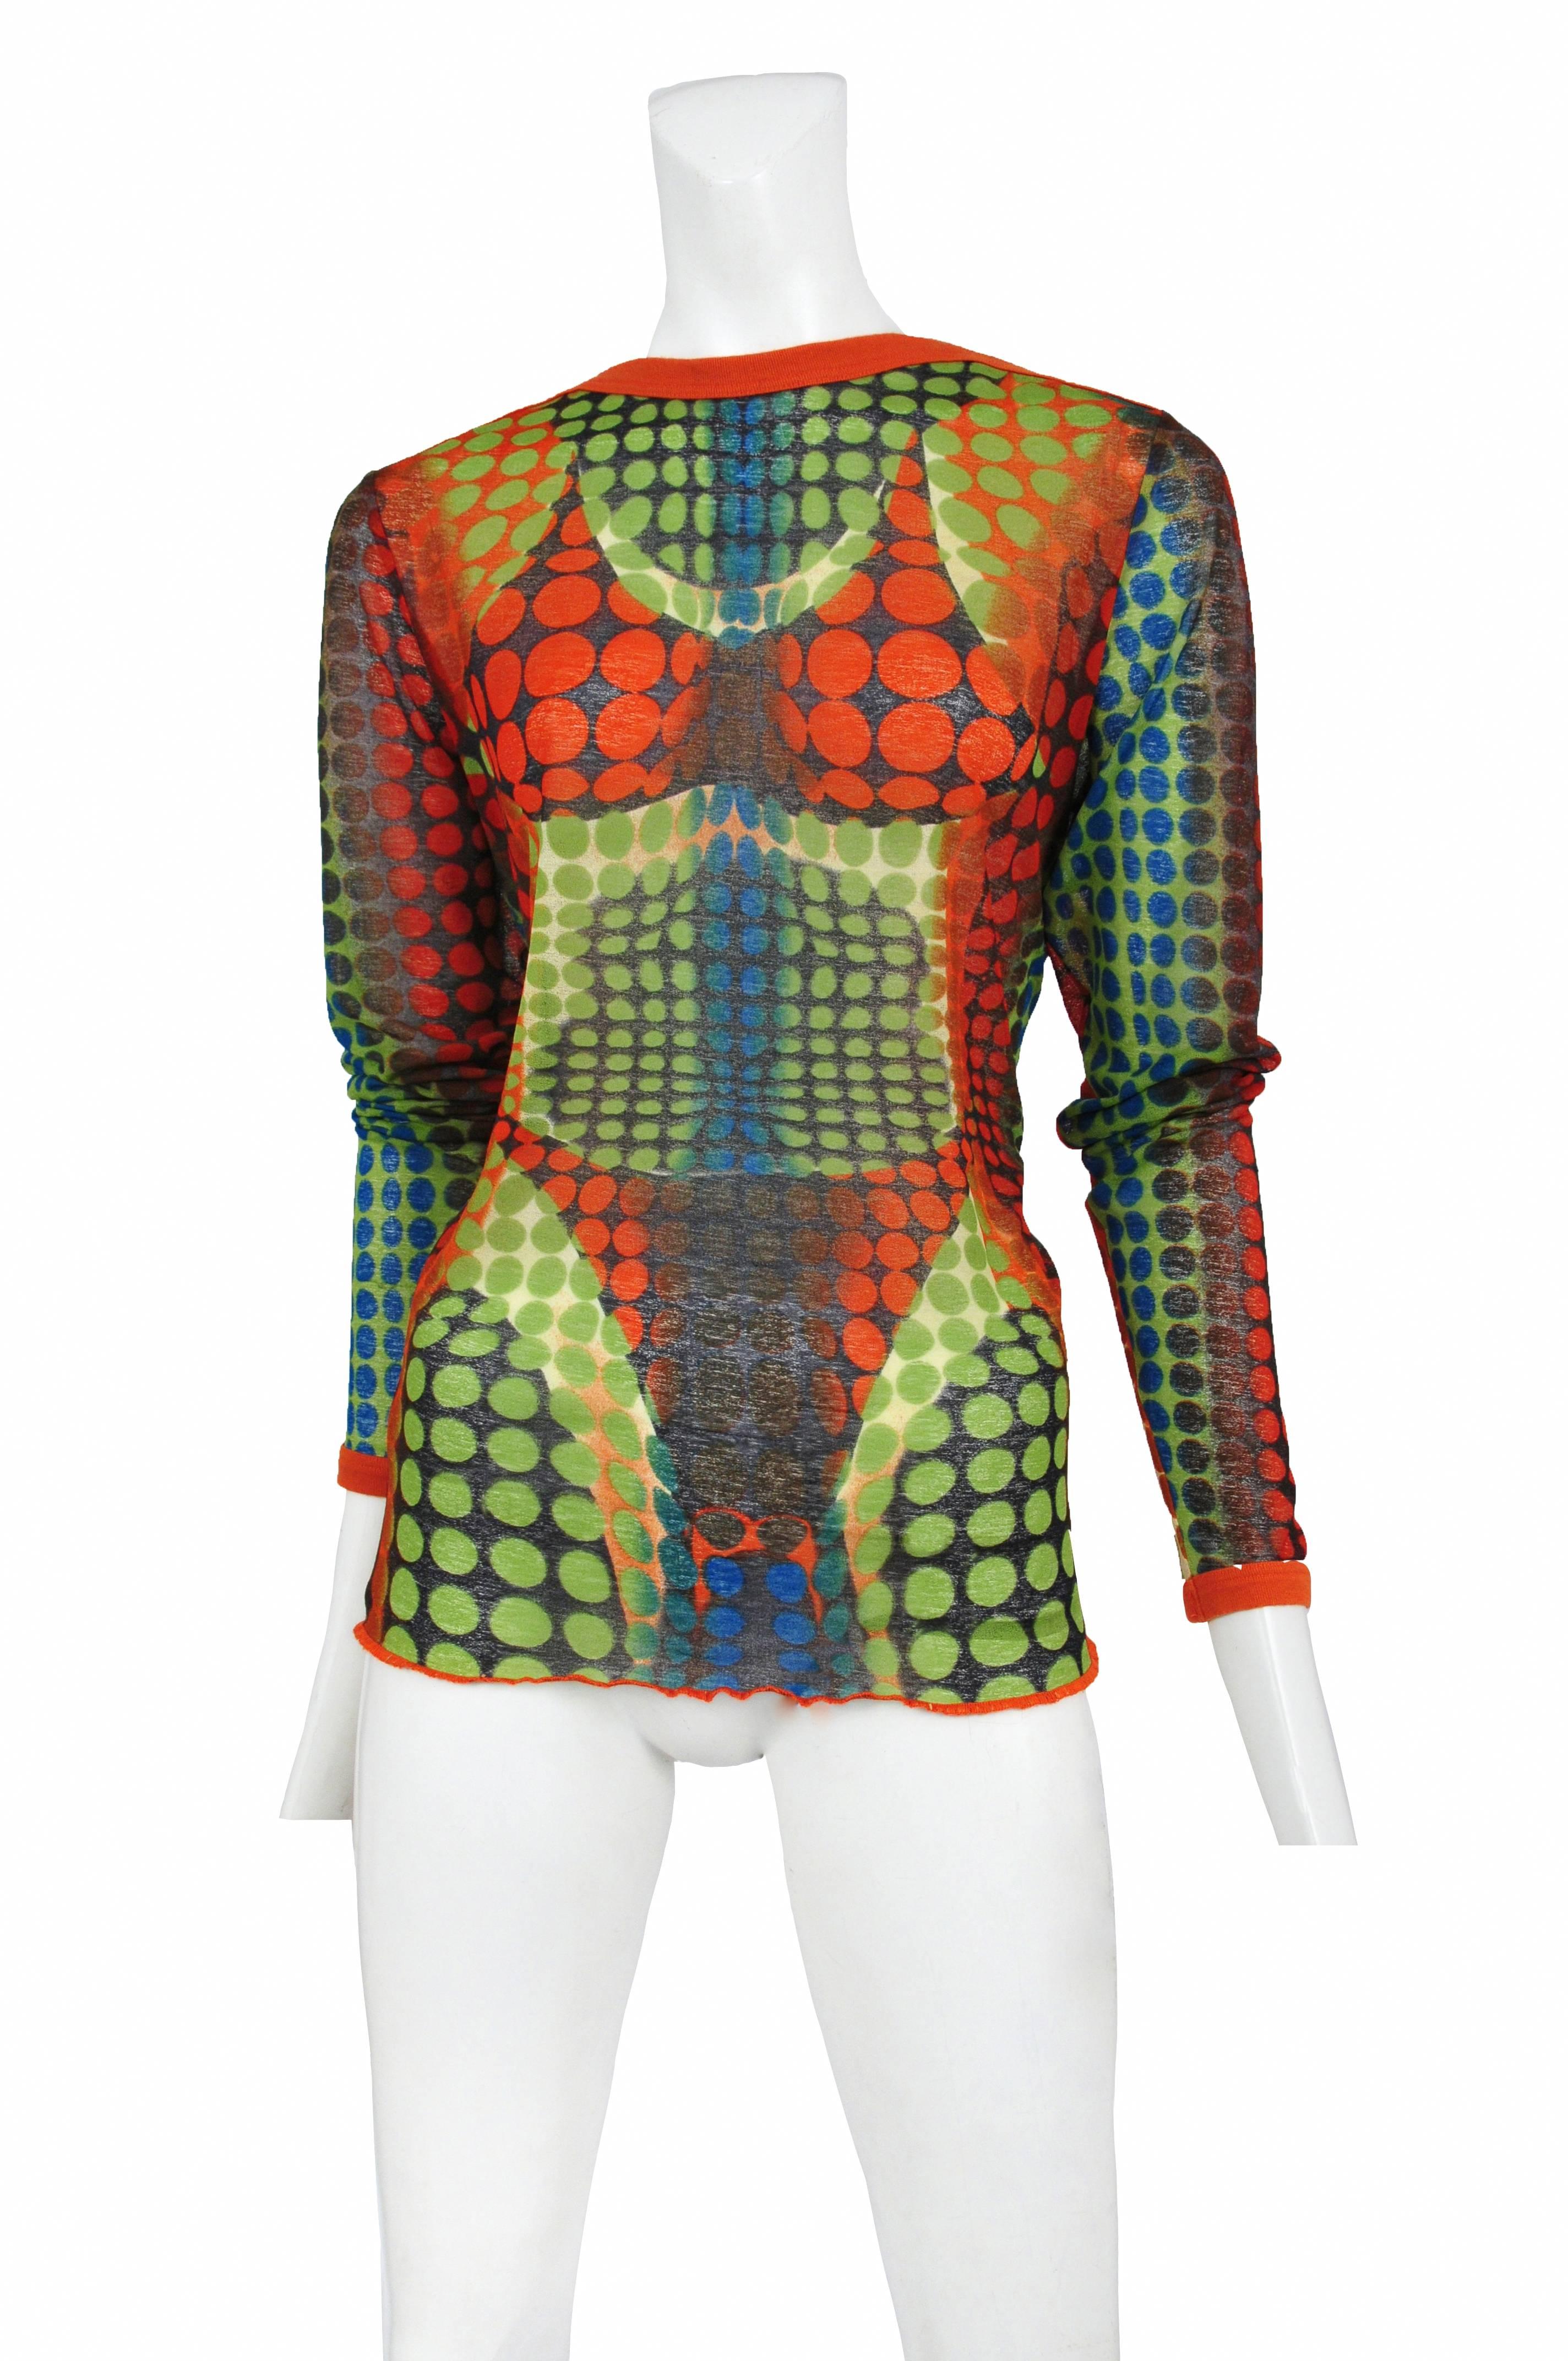 Vintage Jean Paul Gaultier iconic mesh long sleeve top with bikini motif in dot formations. Circa 1995.

Please inquire for additional images.